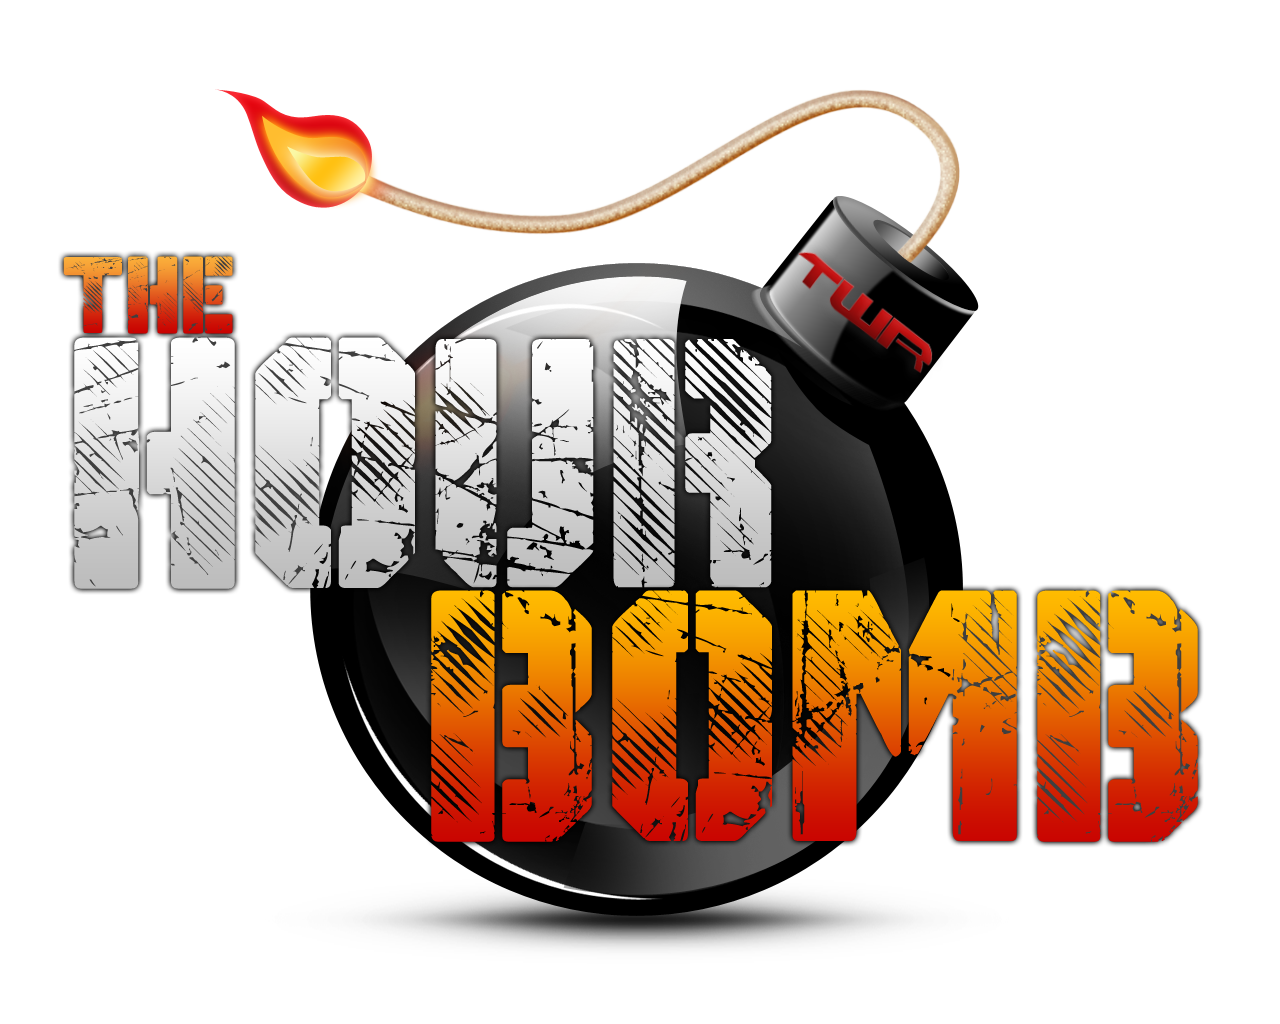 The Hour Bomb #33 Snitches Get Glitches